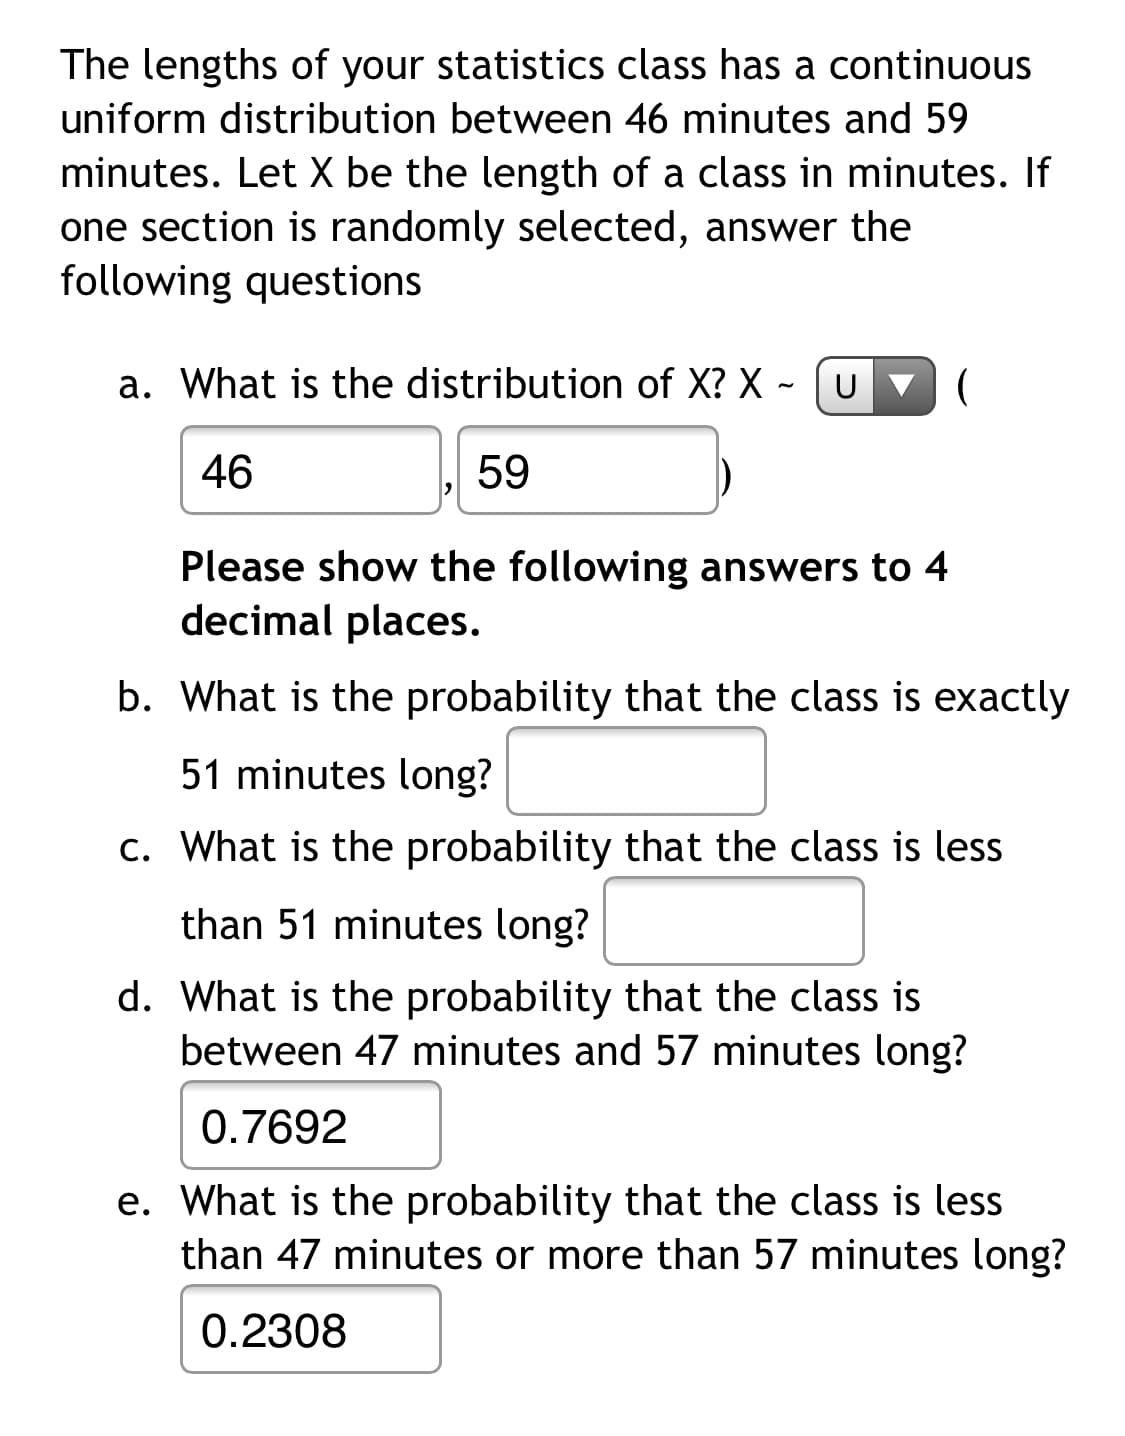 The lengths of your statistics class has a continuous
uniform distribution between 46 minutes and 59
minutes. Let X be the length of a class in minutes. If
one section is randomly selected, answer the
following questions
a. What is the distribution of X? X ~ [ U v (
46
59
Please show the following answers to 4
decimal places.
b. What is the probability that the class is exactly
51 minutes long?
c. What is the probability that the class is less
than 51 minutes long?
d. What is the probability that the class is
between 47 minutes and 57 minutes long?
0.7692
e. What is the probability that the class is less
than 47 minutes or more than 57 minutes long?
0.2308
